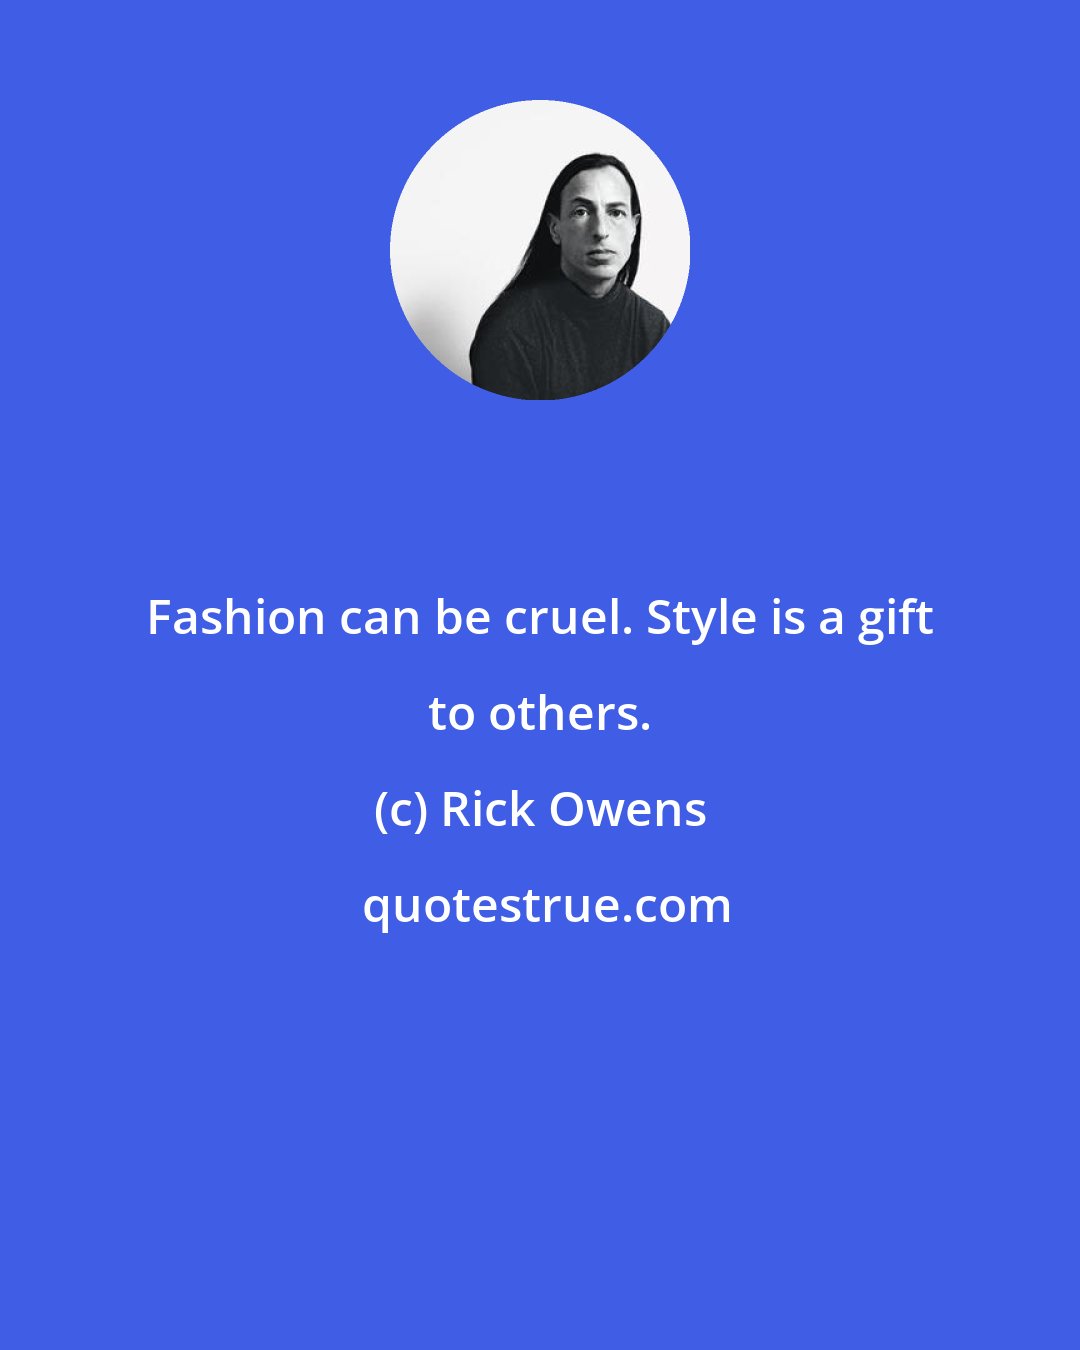 Rick Owens: Fashion can be cruel. Style is a gift to others.